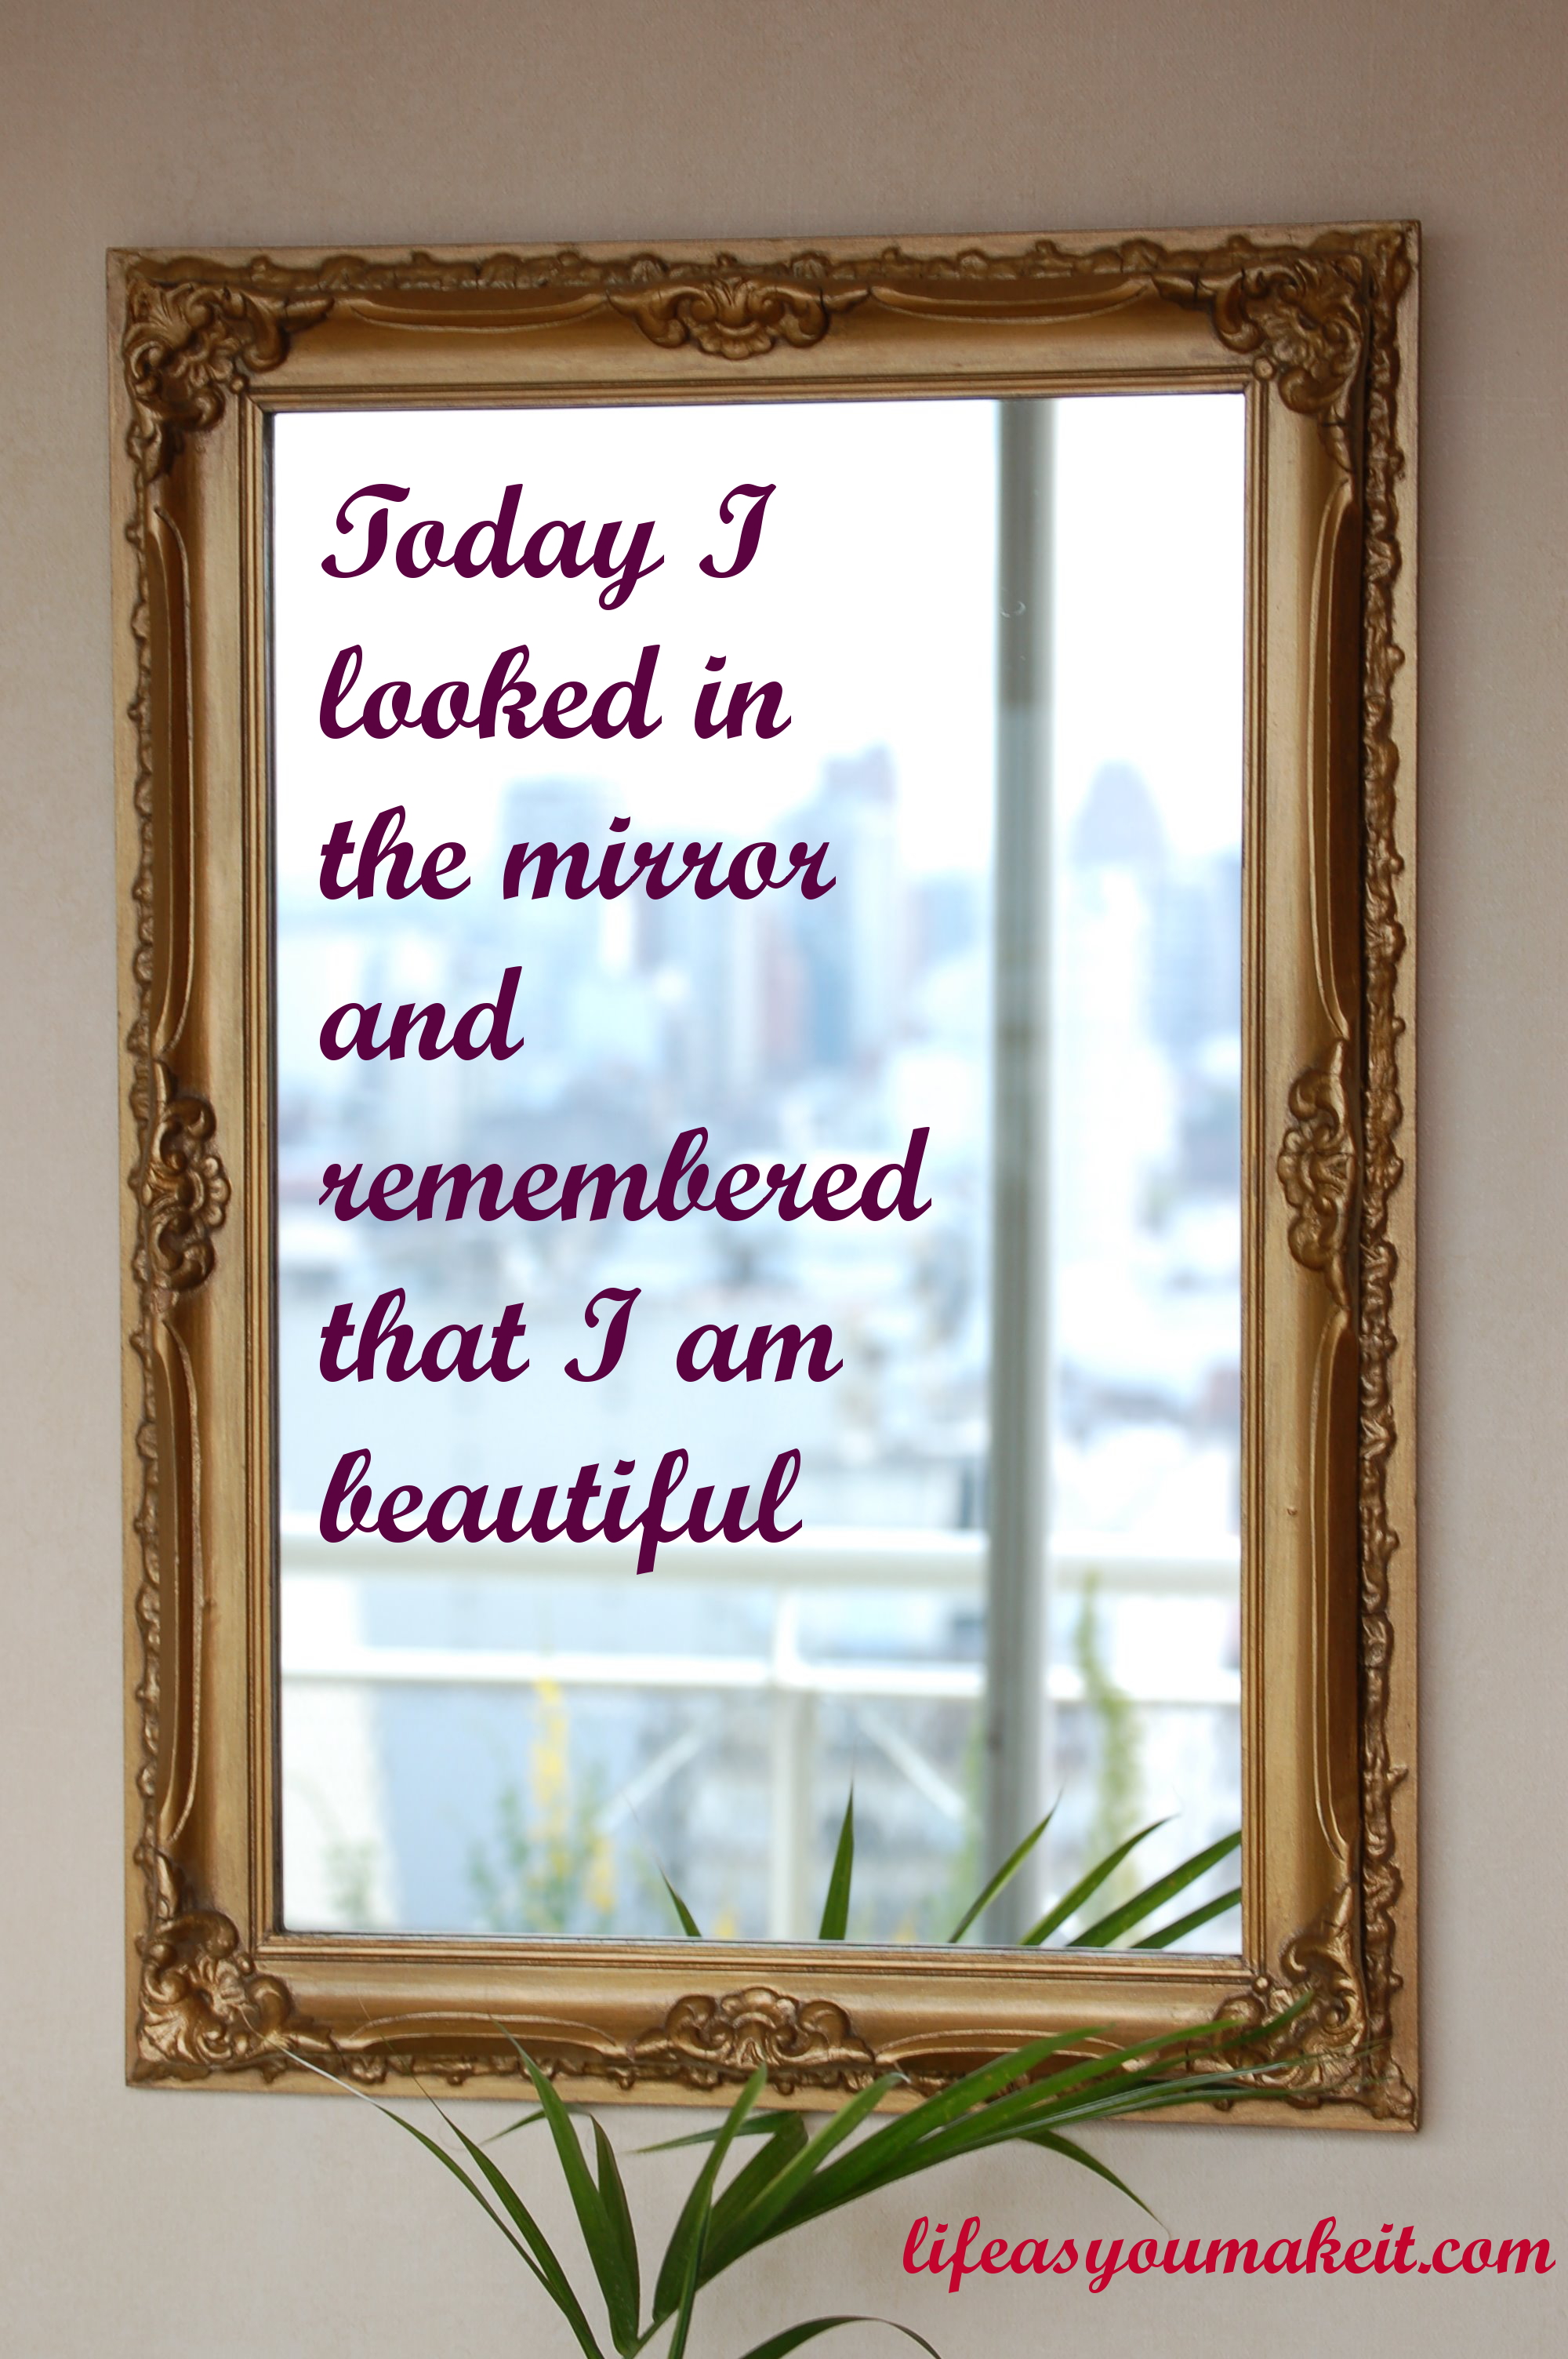 Today I looked in the mirror and remembered that I am beautiful